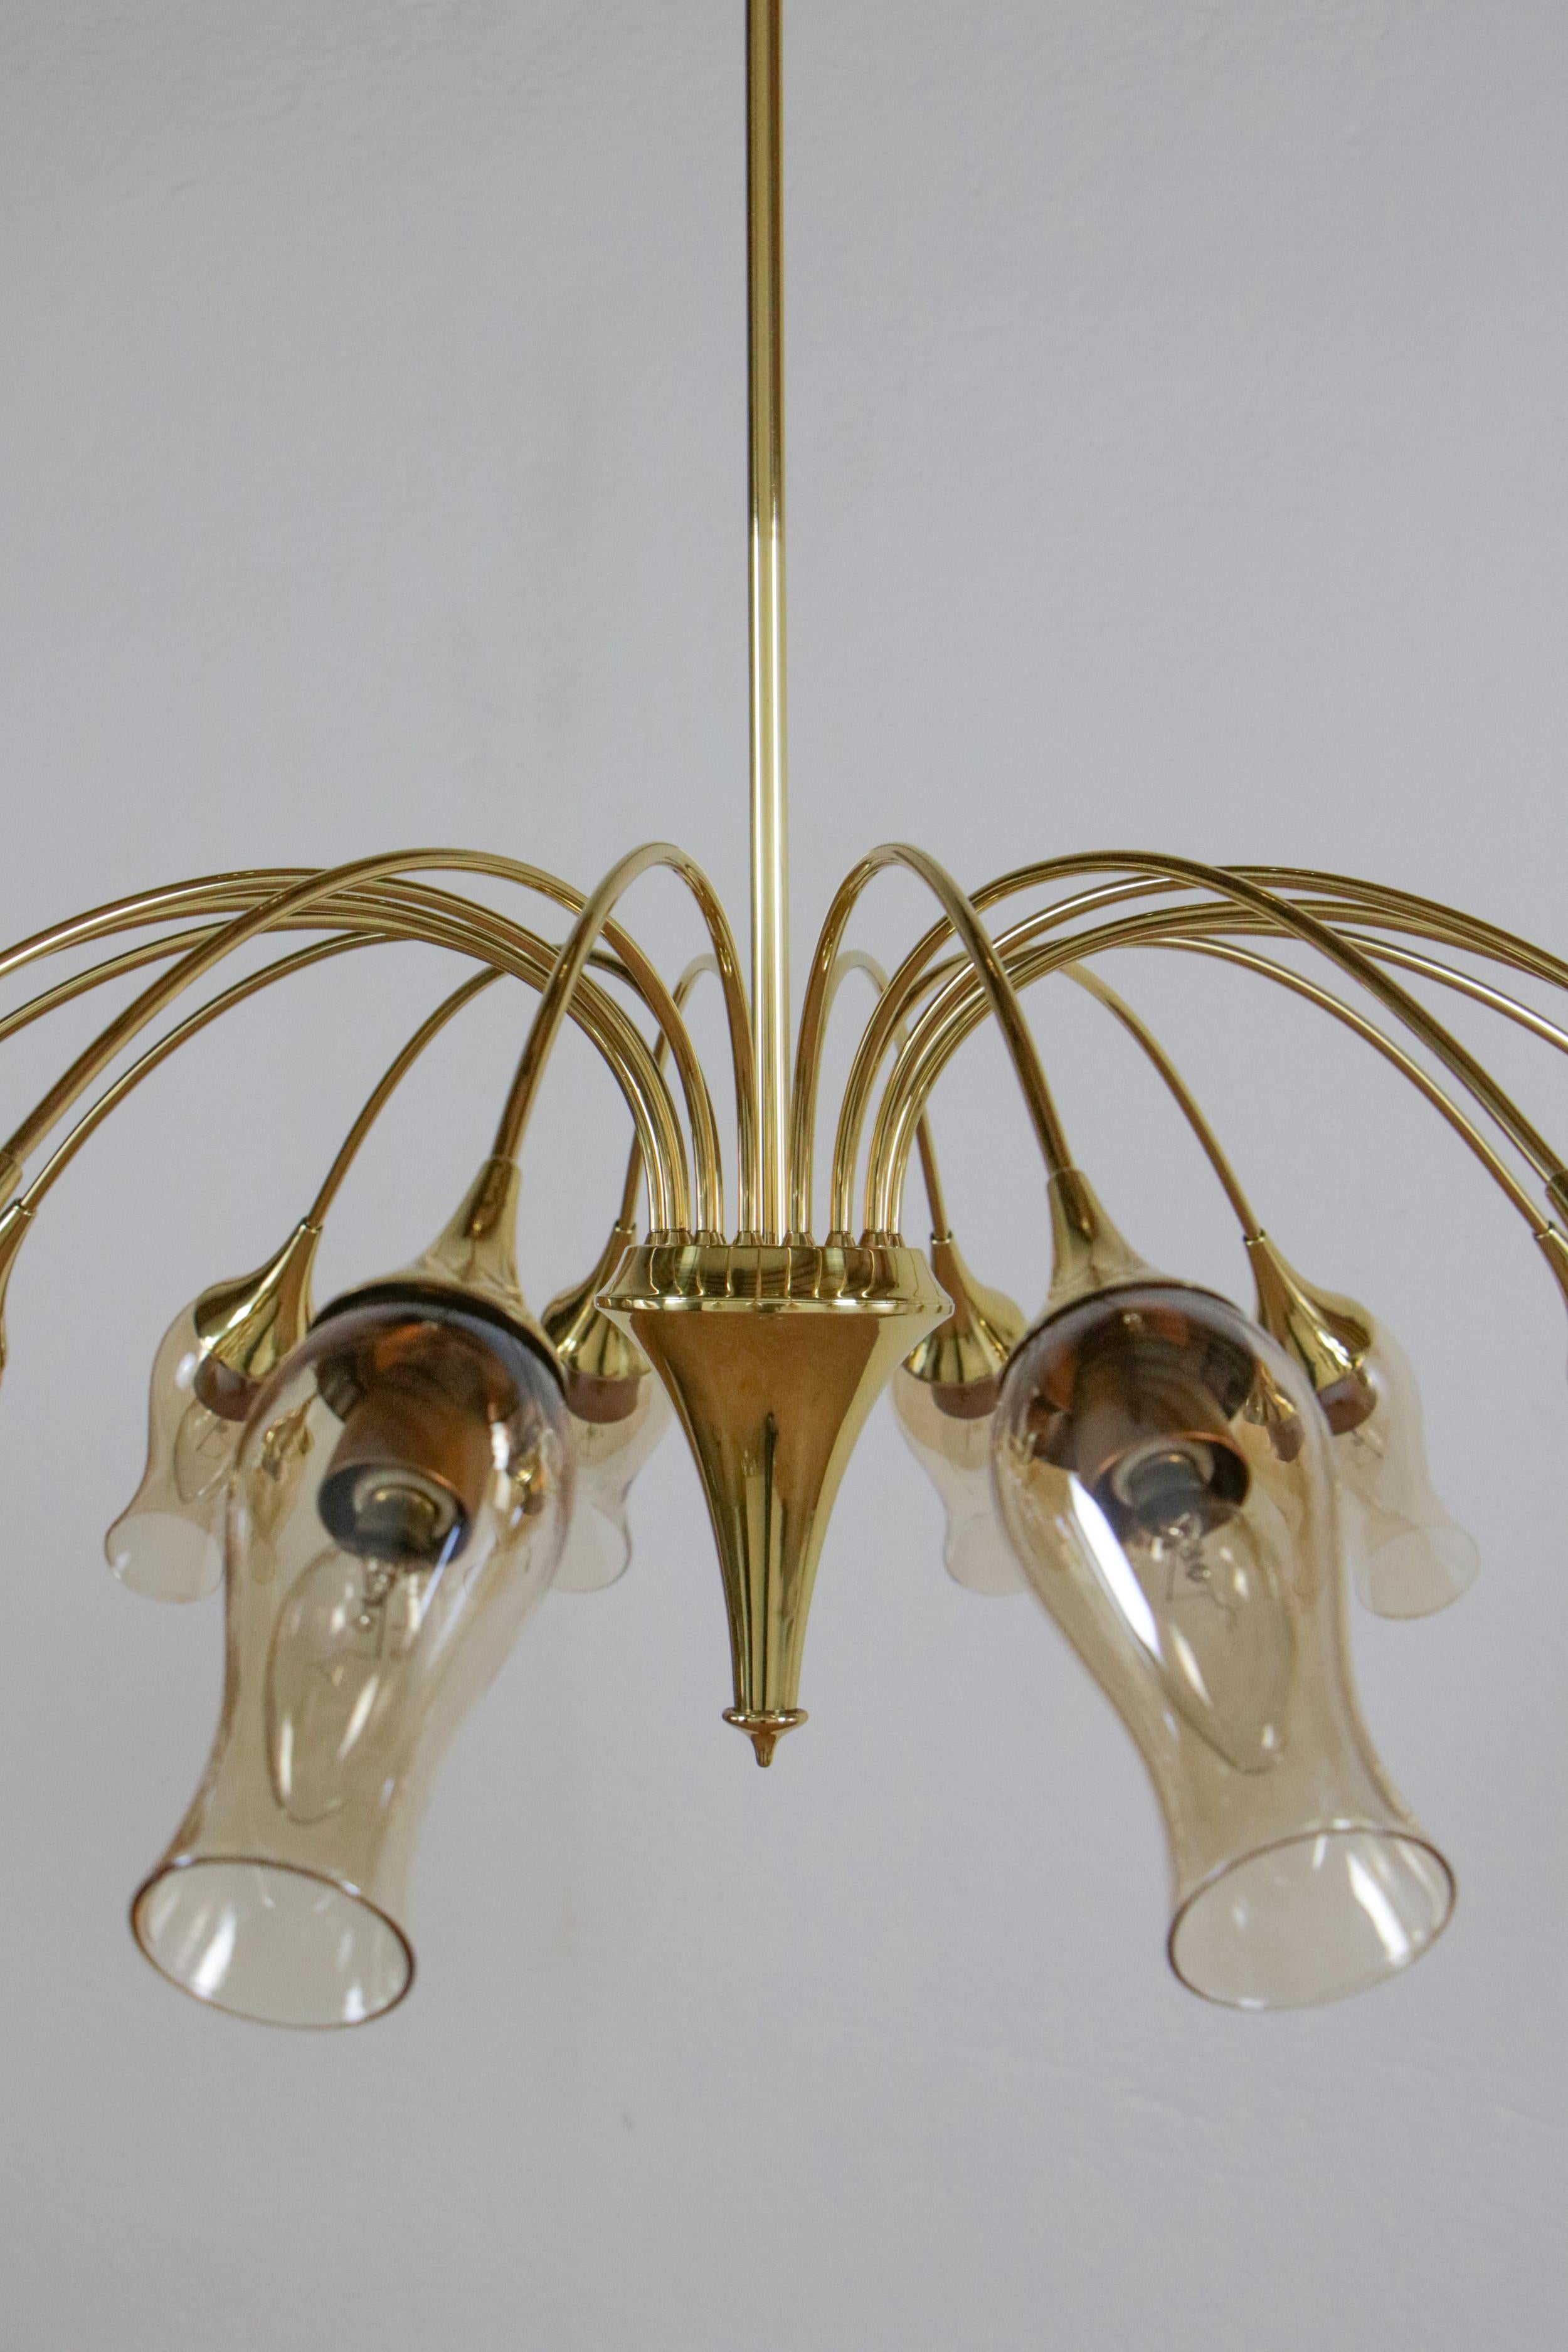 Italian Mid-Century Modern Big Spider Murano Glass Chandelier, Gold Color, 1950s For Sale 2